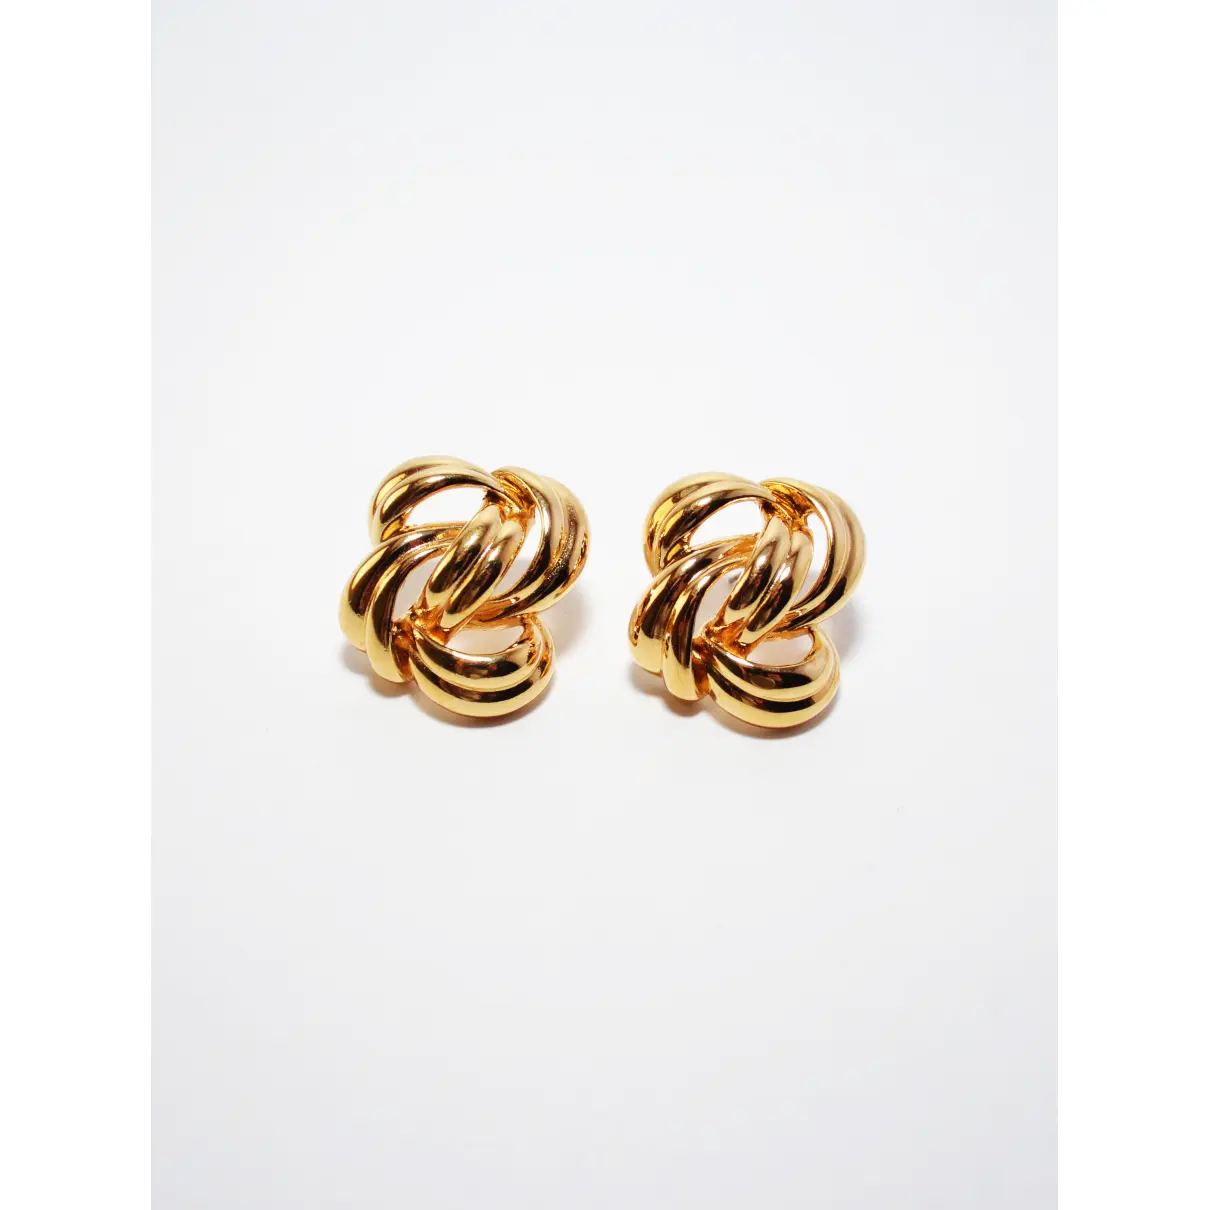 Buy Givenchy Earrings online - Vintage